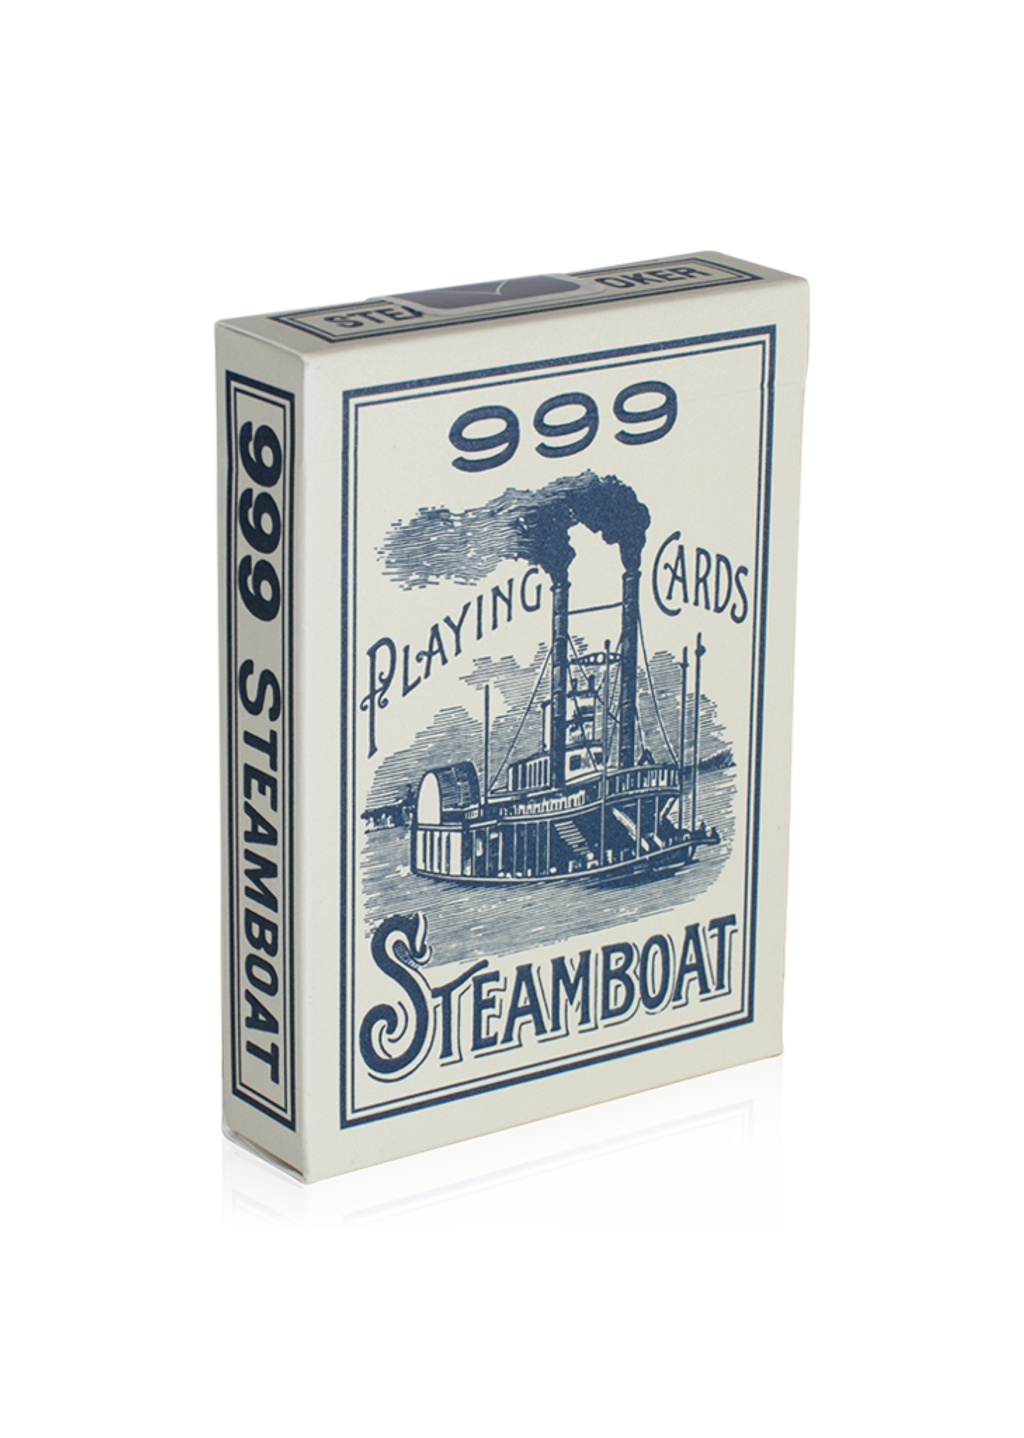 playing-cards-steamboat-999-2_1024x1024.png